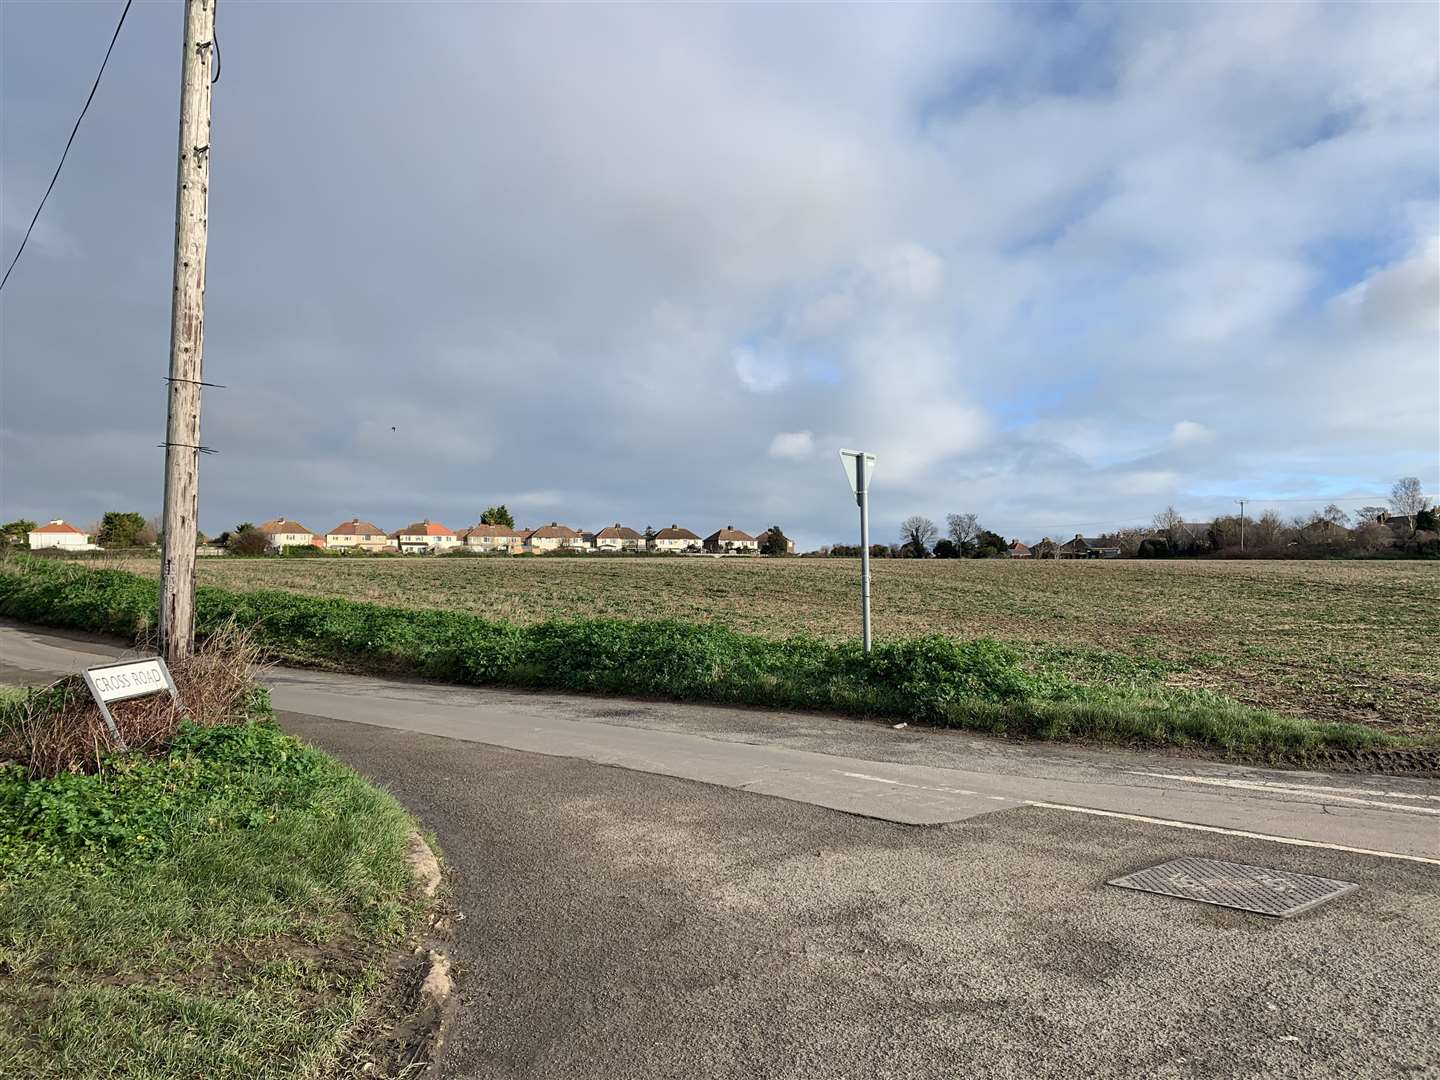 The site was earmarked for 100 new homes at Cross Road. The picture shows Lydia Road in the background